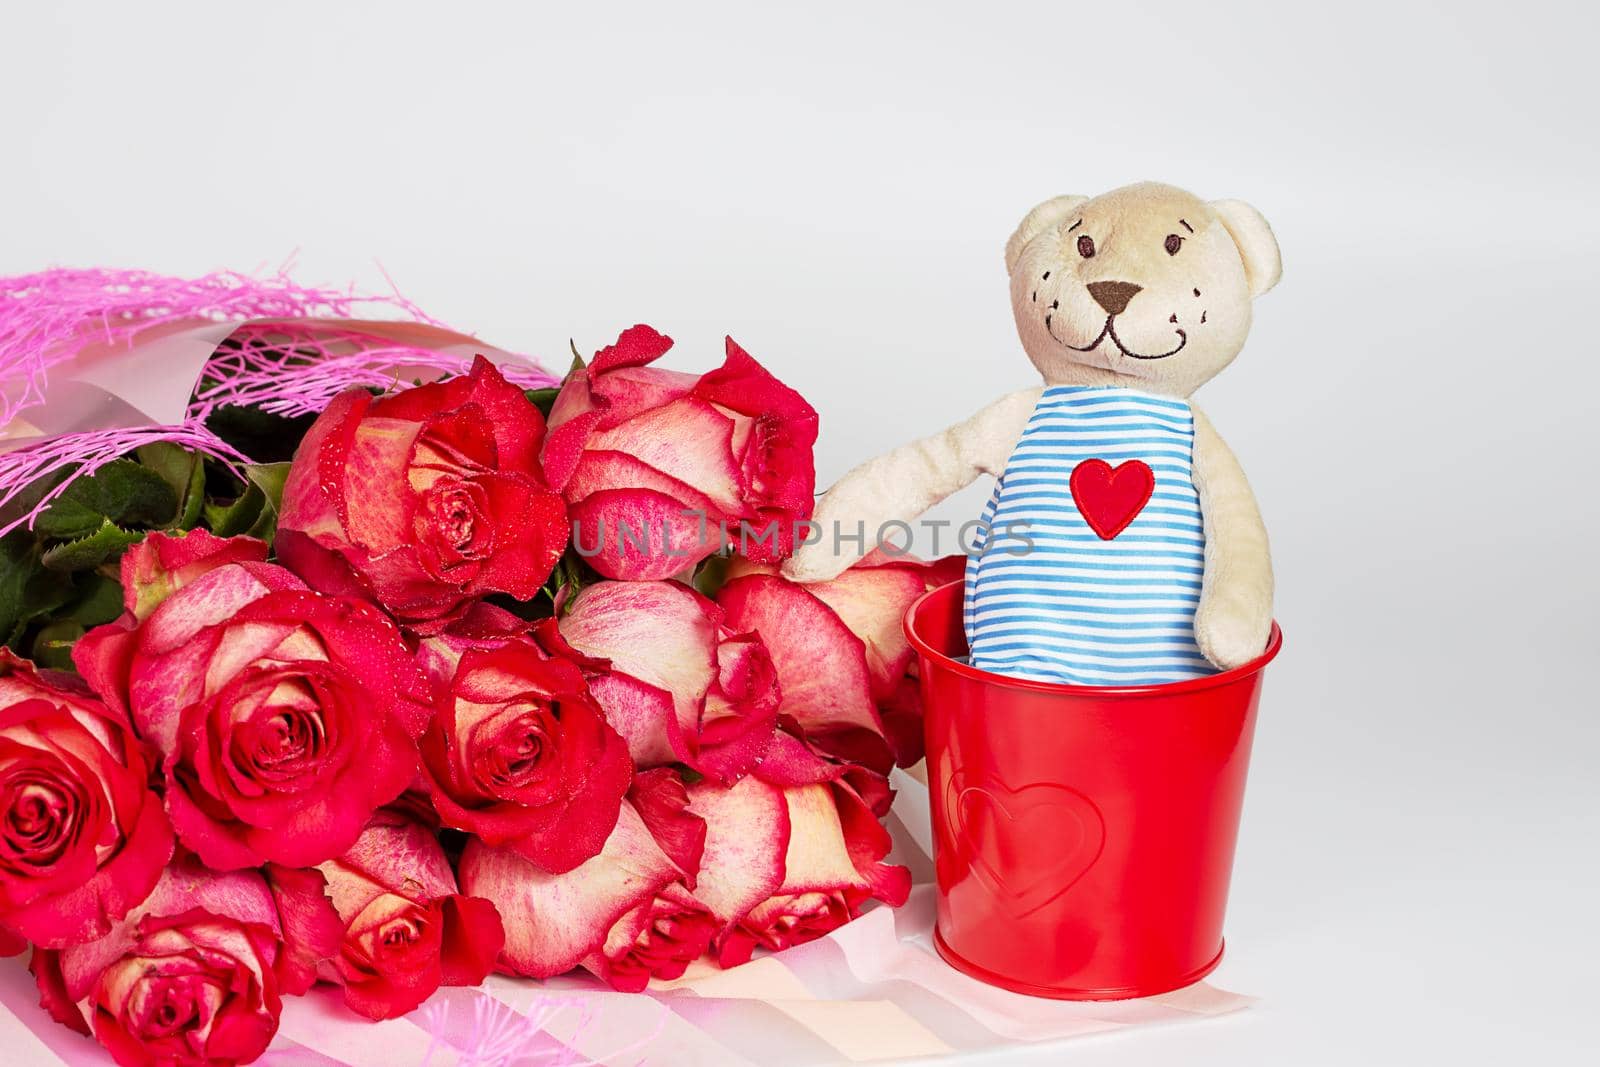 A bouquet of red roses in a gift paper package and a soft toy bear with by galinasharapova